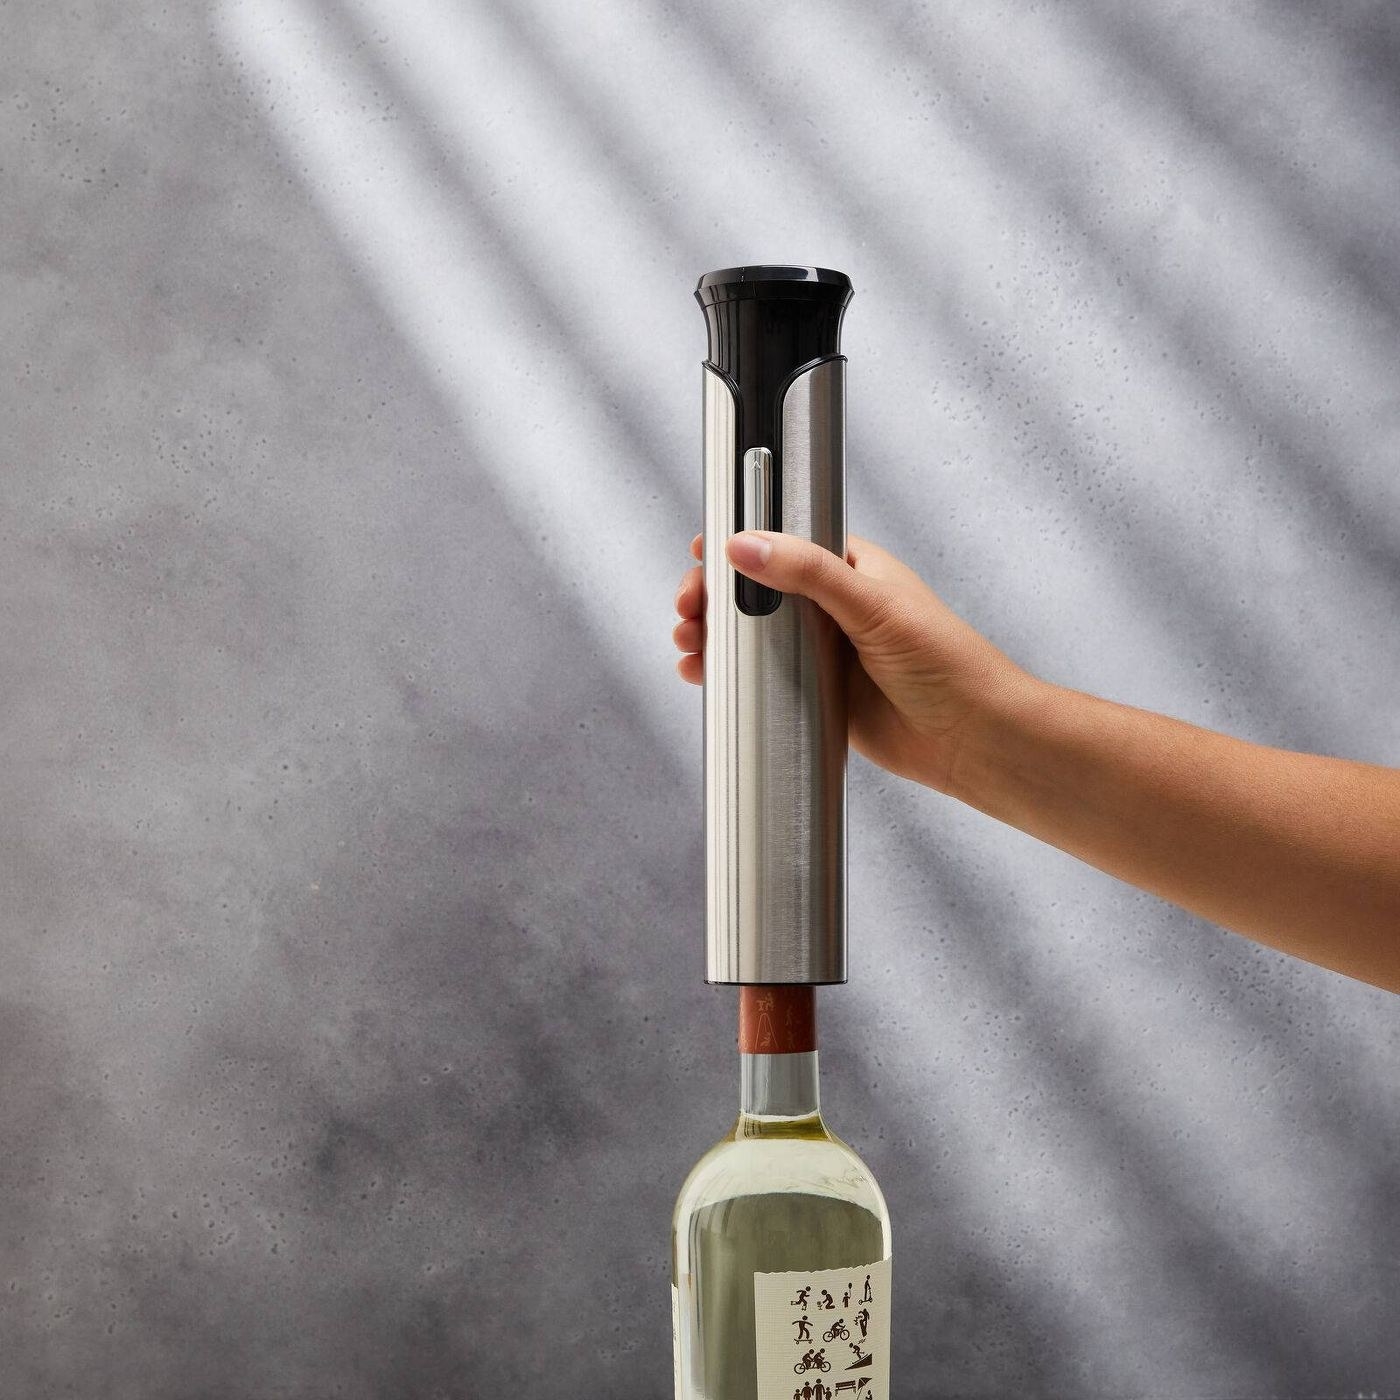 the stainless steel wine opener on a wine bottle